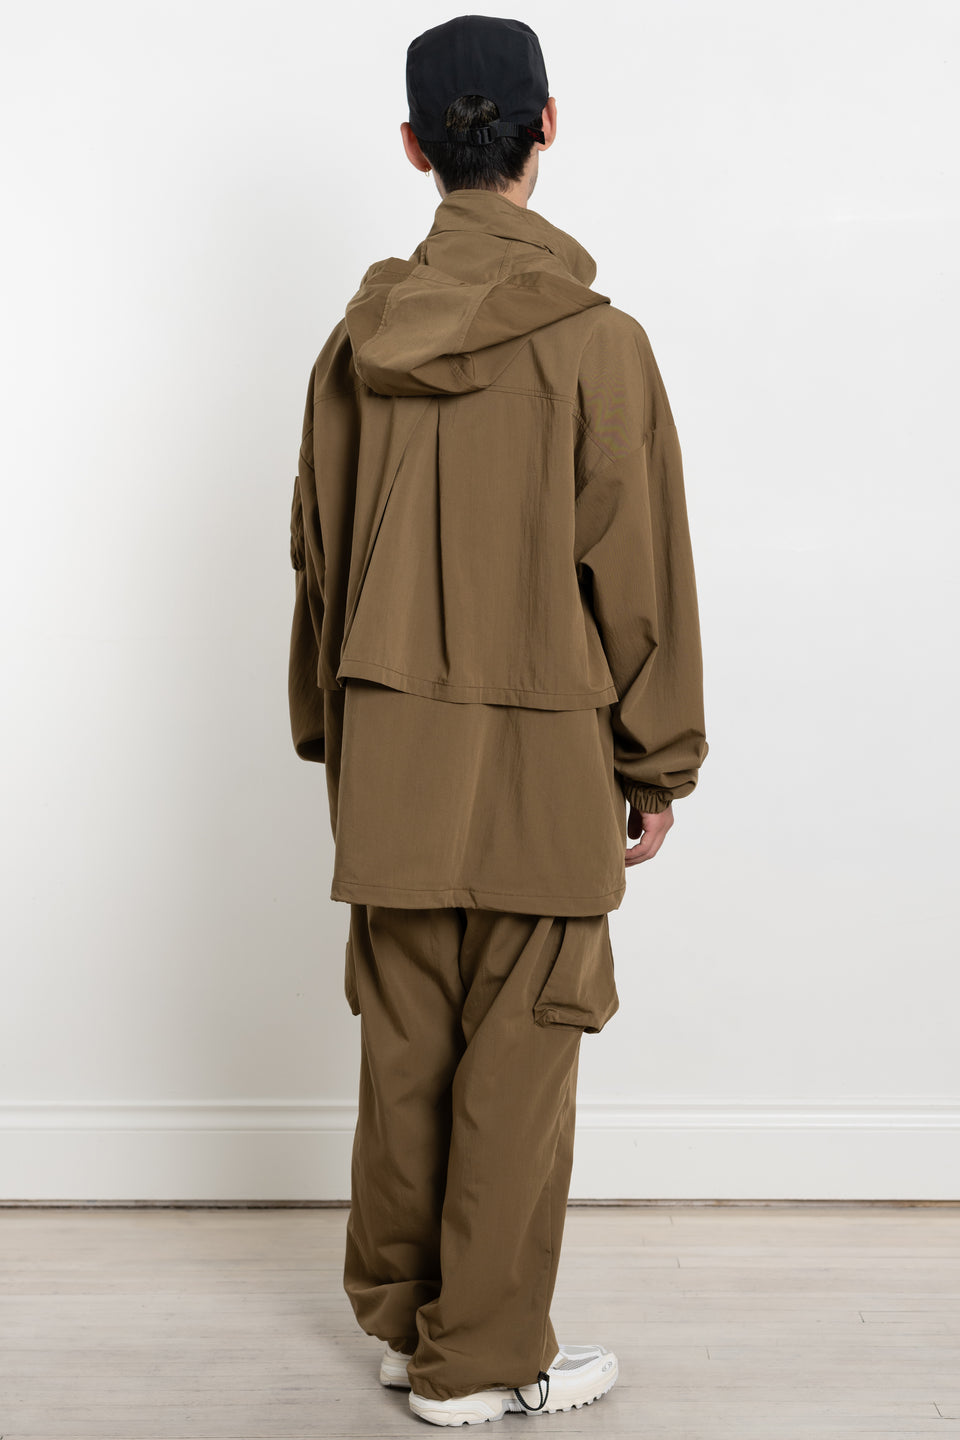 Gramicci Japan F/Ce. FW23 Men's Collection Gramicci by F/Ce. Mountain Jacket Coyote Calculus Victoria BC Canada